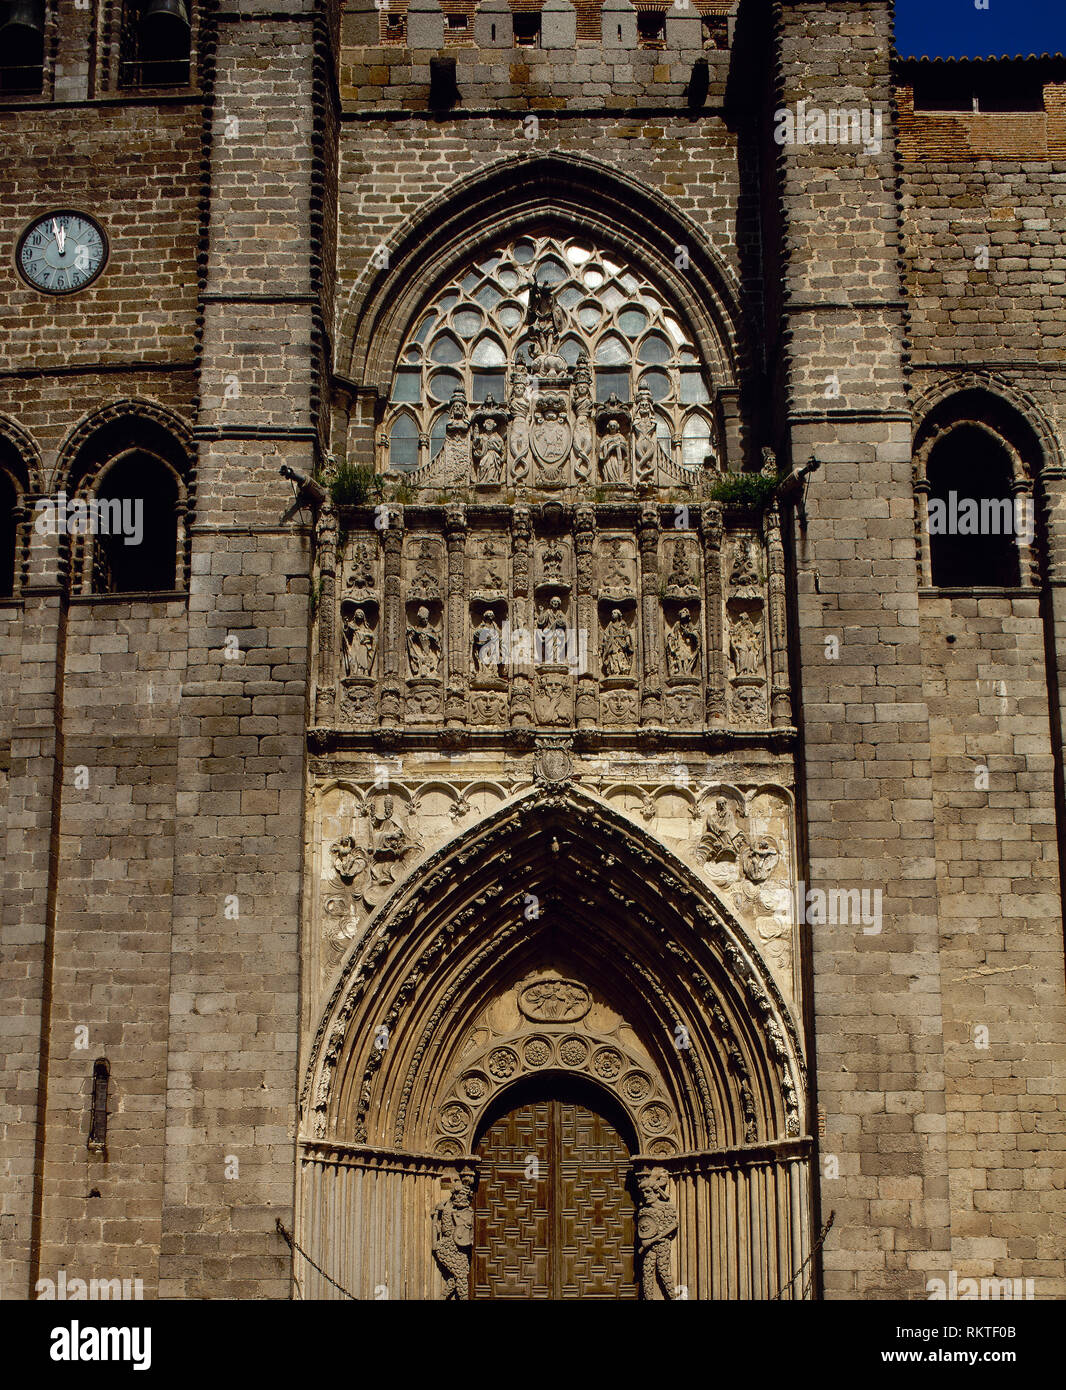 Spain, Castile and Leon, Avila. Cathedral of St. Salvador. Catholic church. It was started in the 12th century in Romanesque style and concluded in the 14th century in Gothic style. Western facade, doorway. Stock Photo